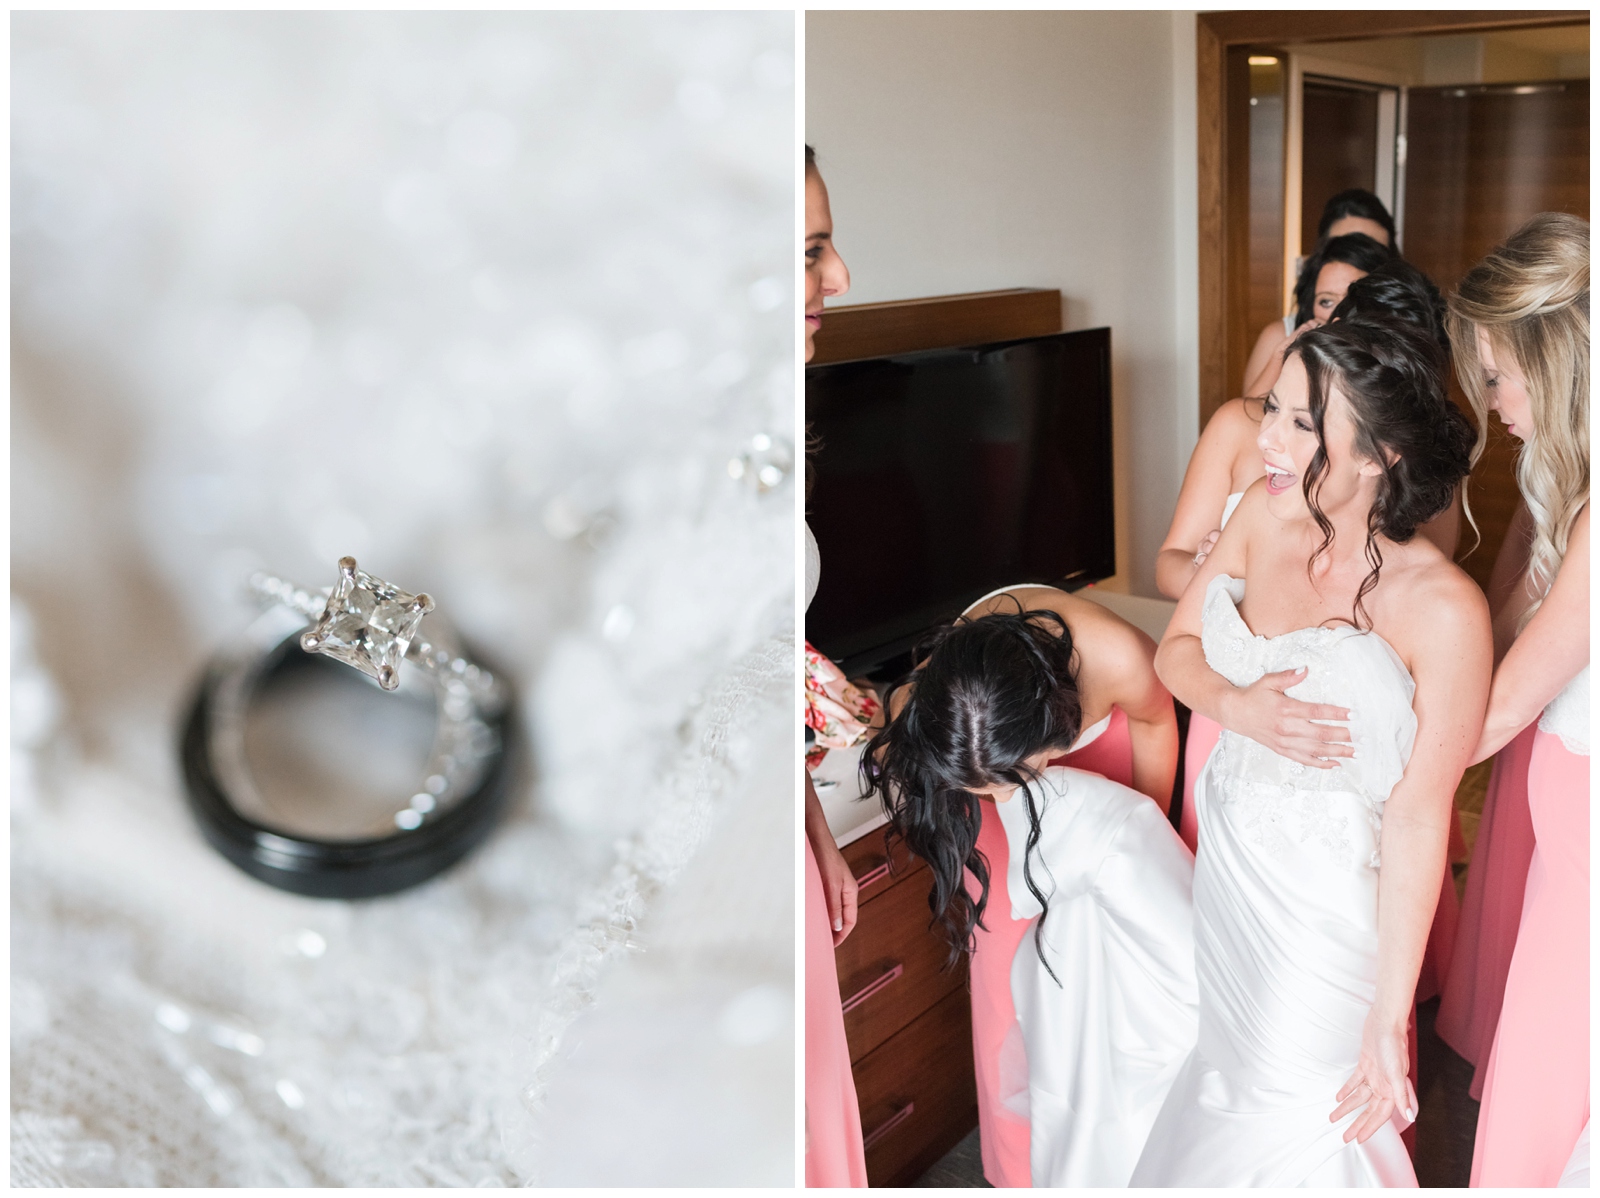 diamond engagement ring sits atop groom's wedding ring while bridesmaids in coral gowns help bride into strapless wedding gown